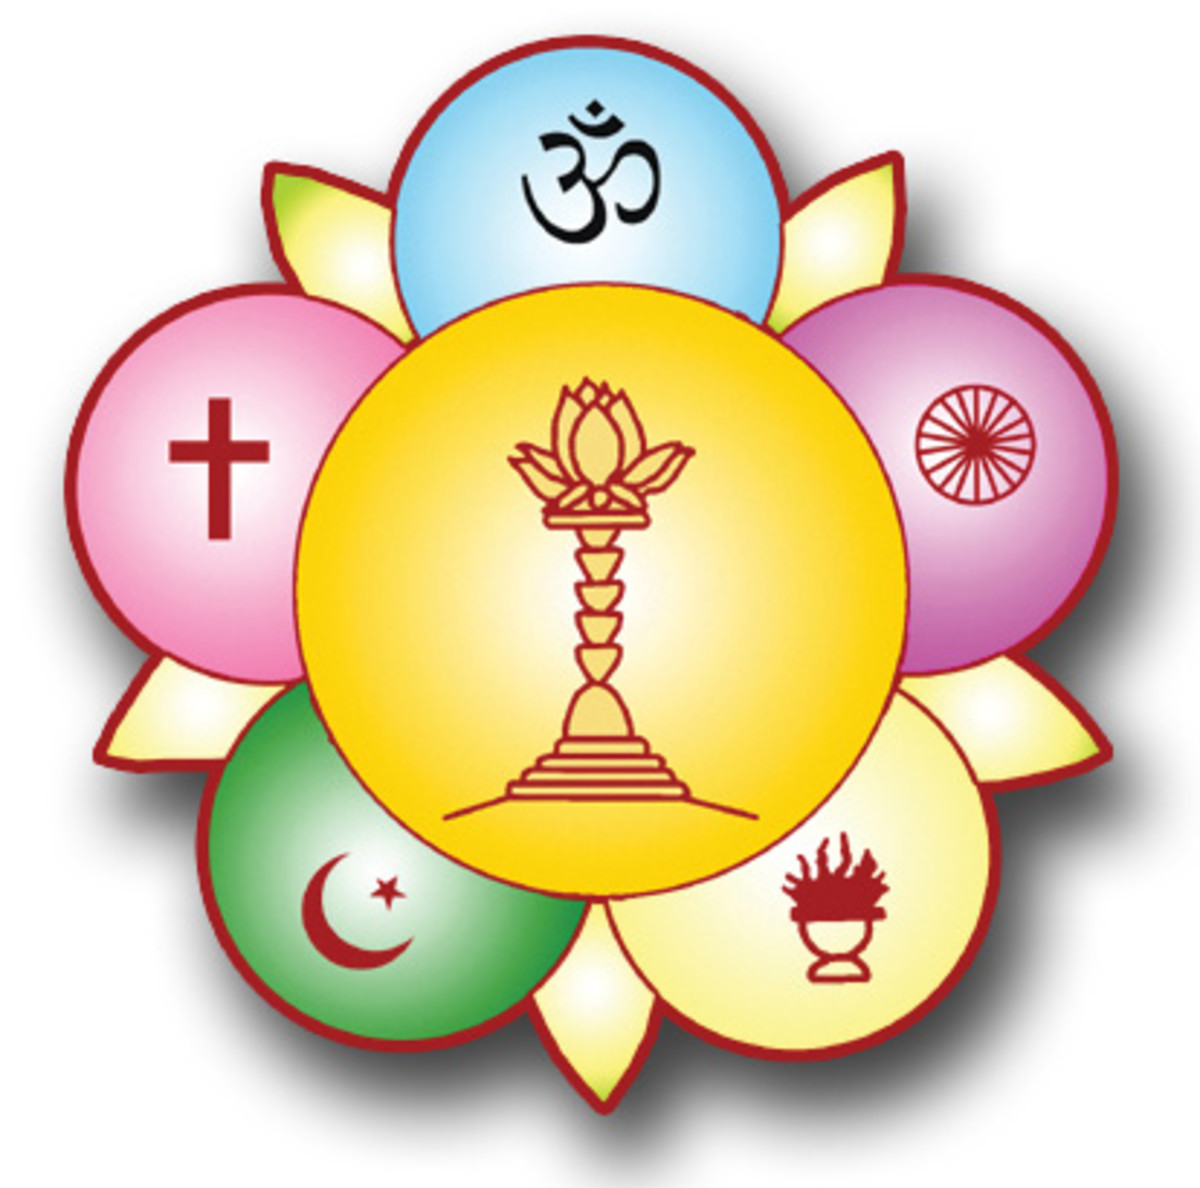 A colored version of the logo Baba designed to represent the unity of all faiths. 